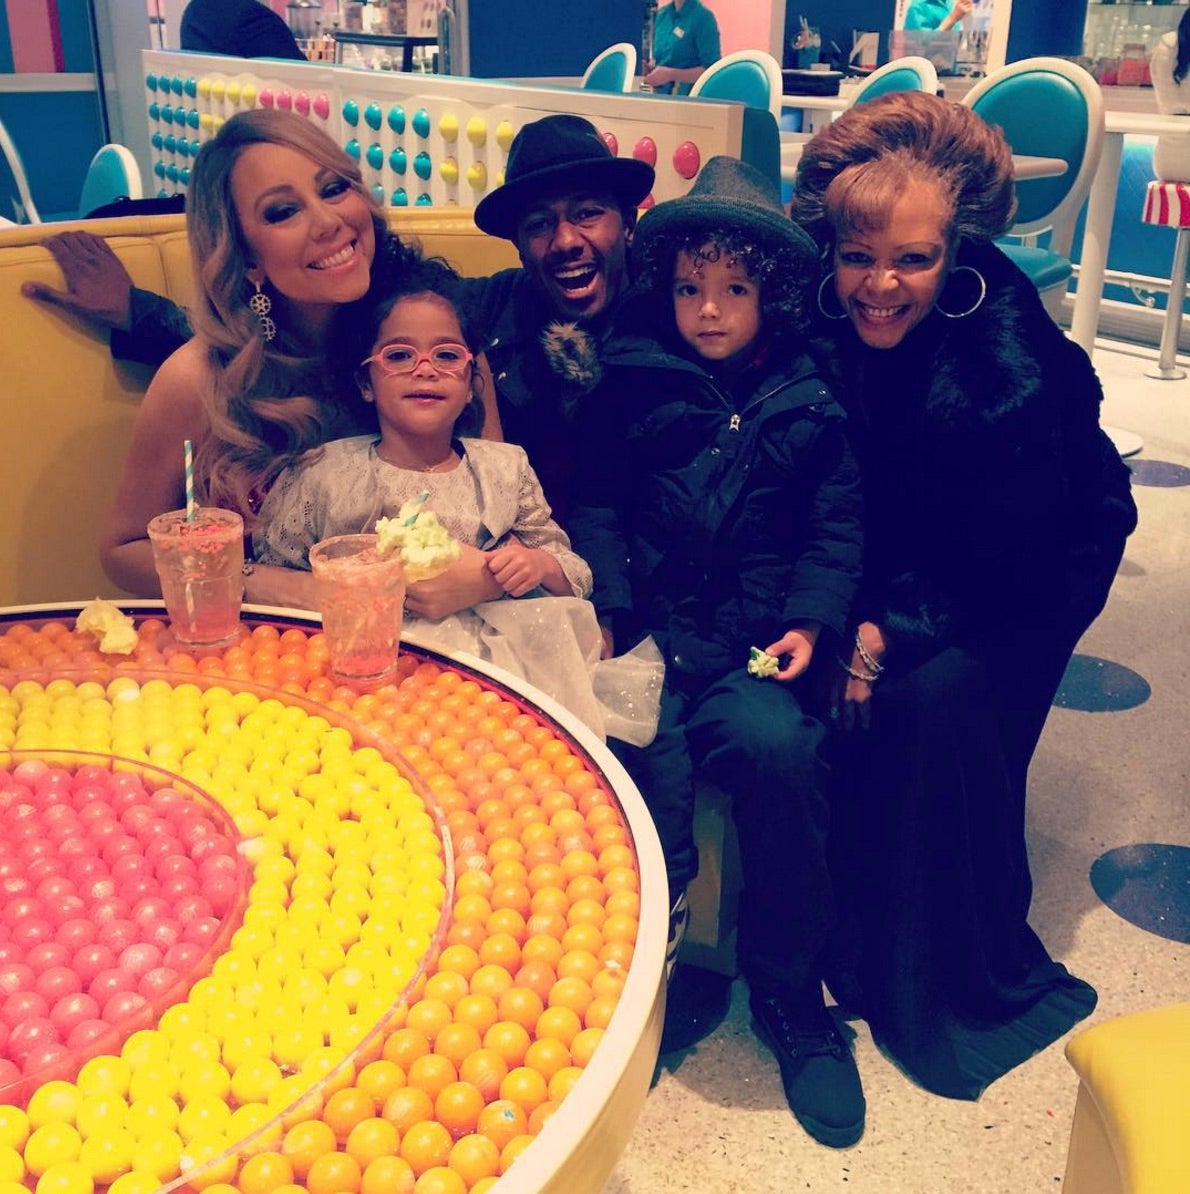 Photo Fab: It's a Family Affair With Nick Cannon, Mariah Carey and 'Dem Babies'